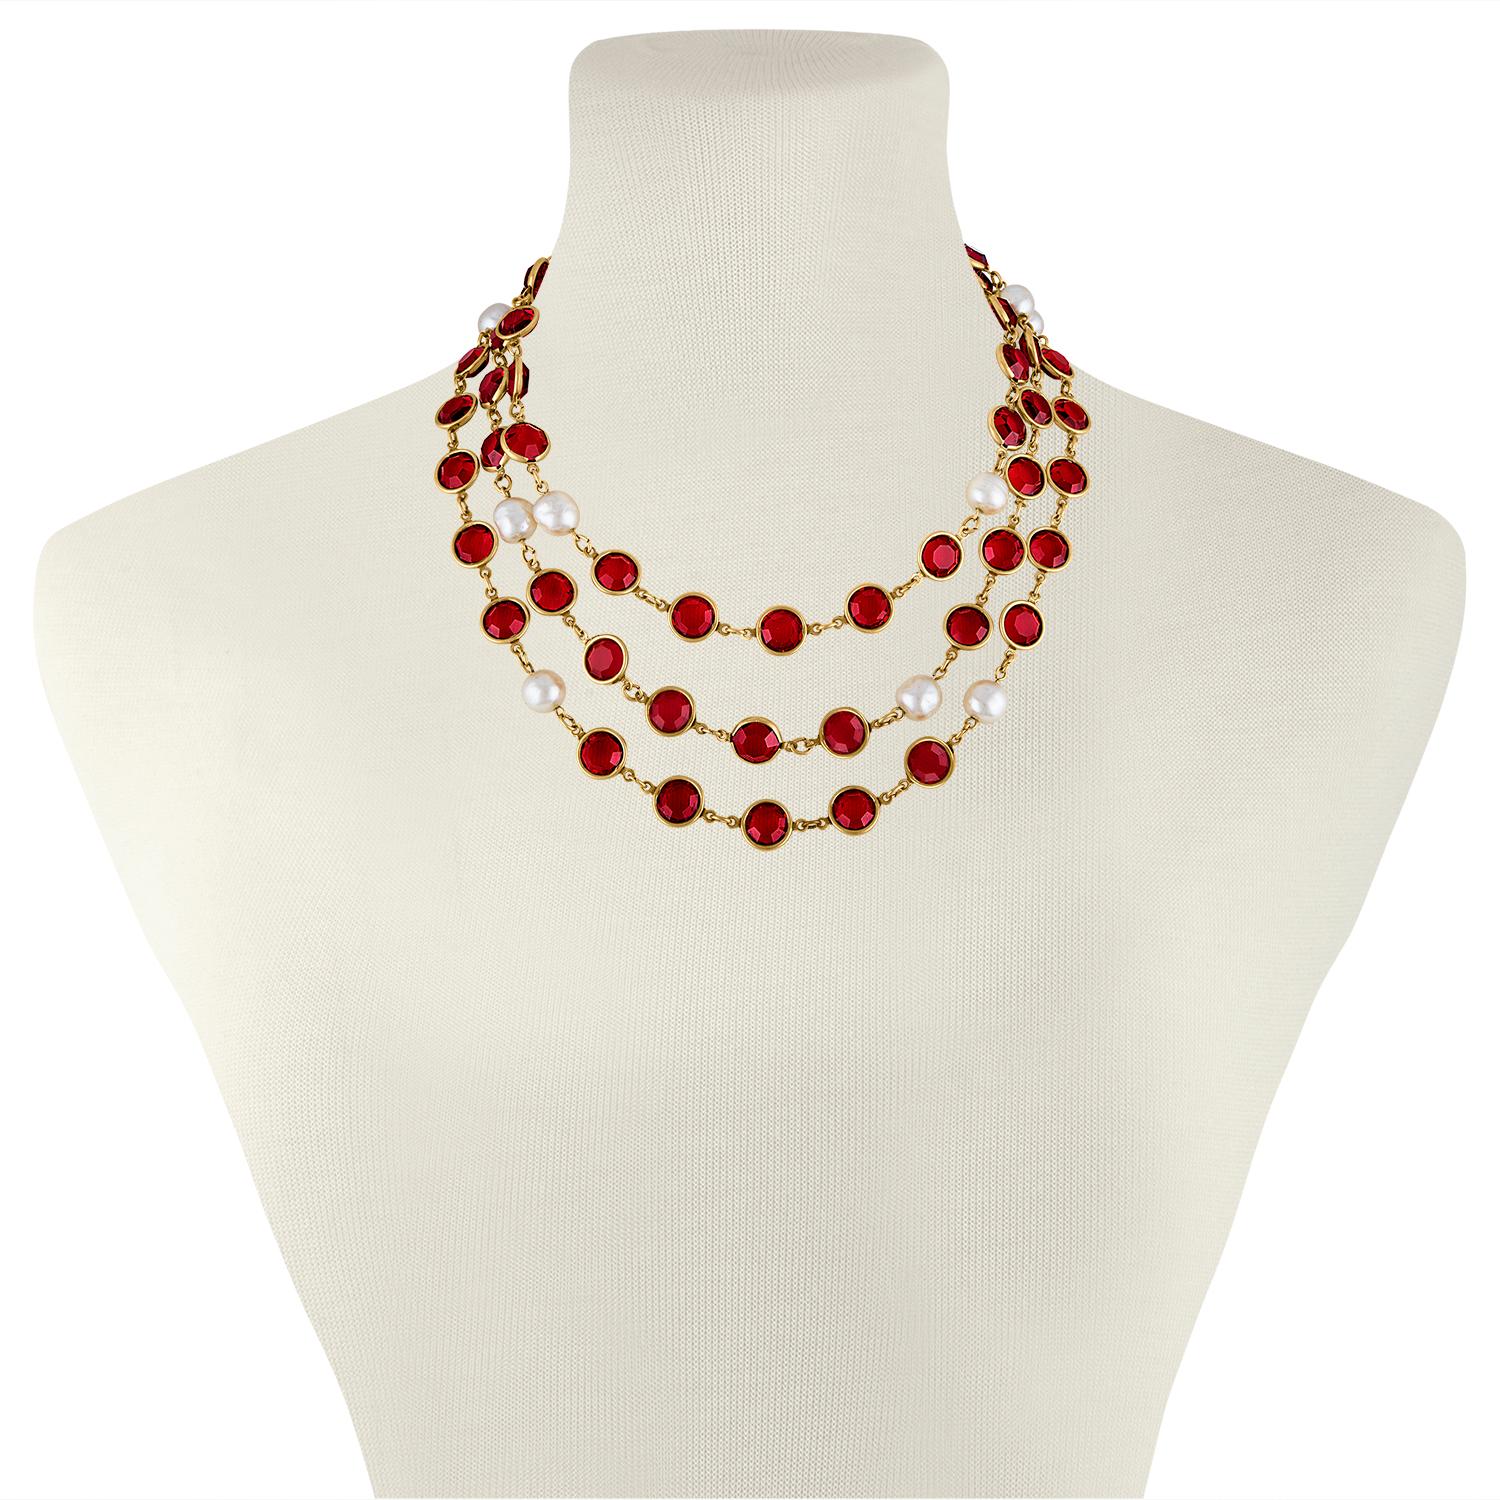 The necklace is by Chanel
The piece is from 1981.
The necklace is red Gripoix with Faux Pearls.
The necklace is 57” long.
The necklace weighs 80.9 grams